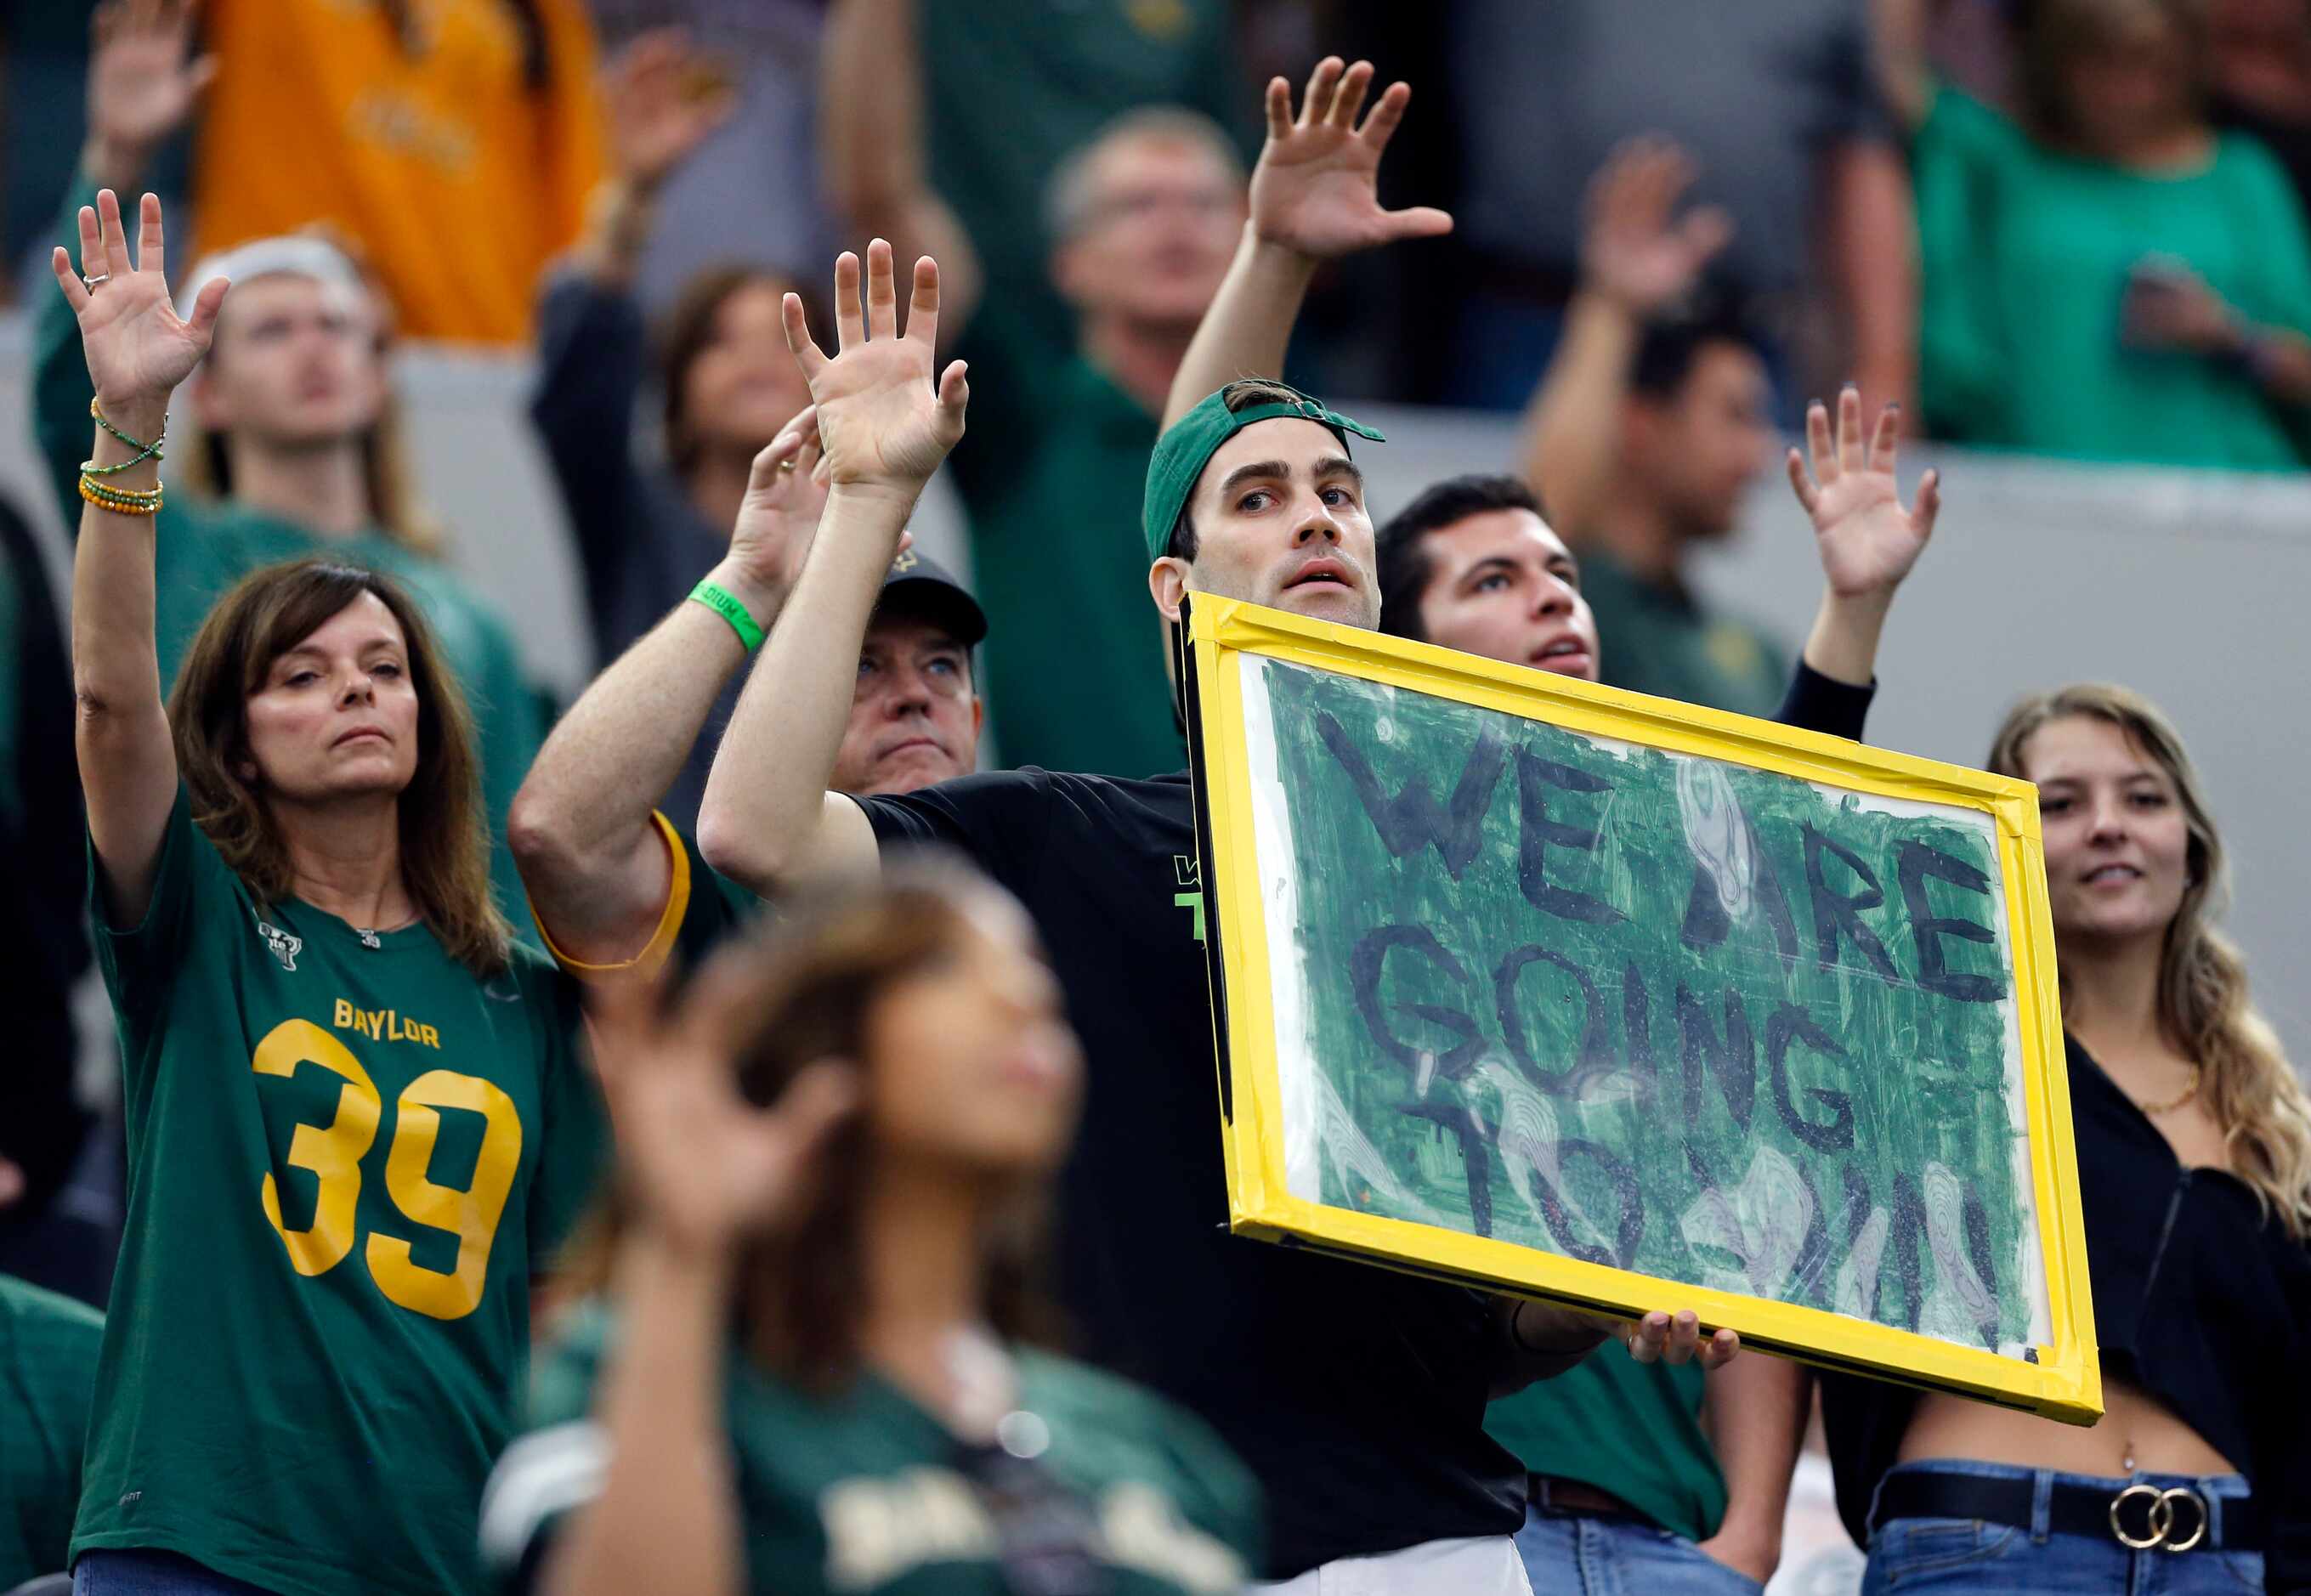 Baylor fans show their spirit in the stands before the start of the Big 12 Championship...